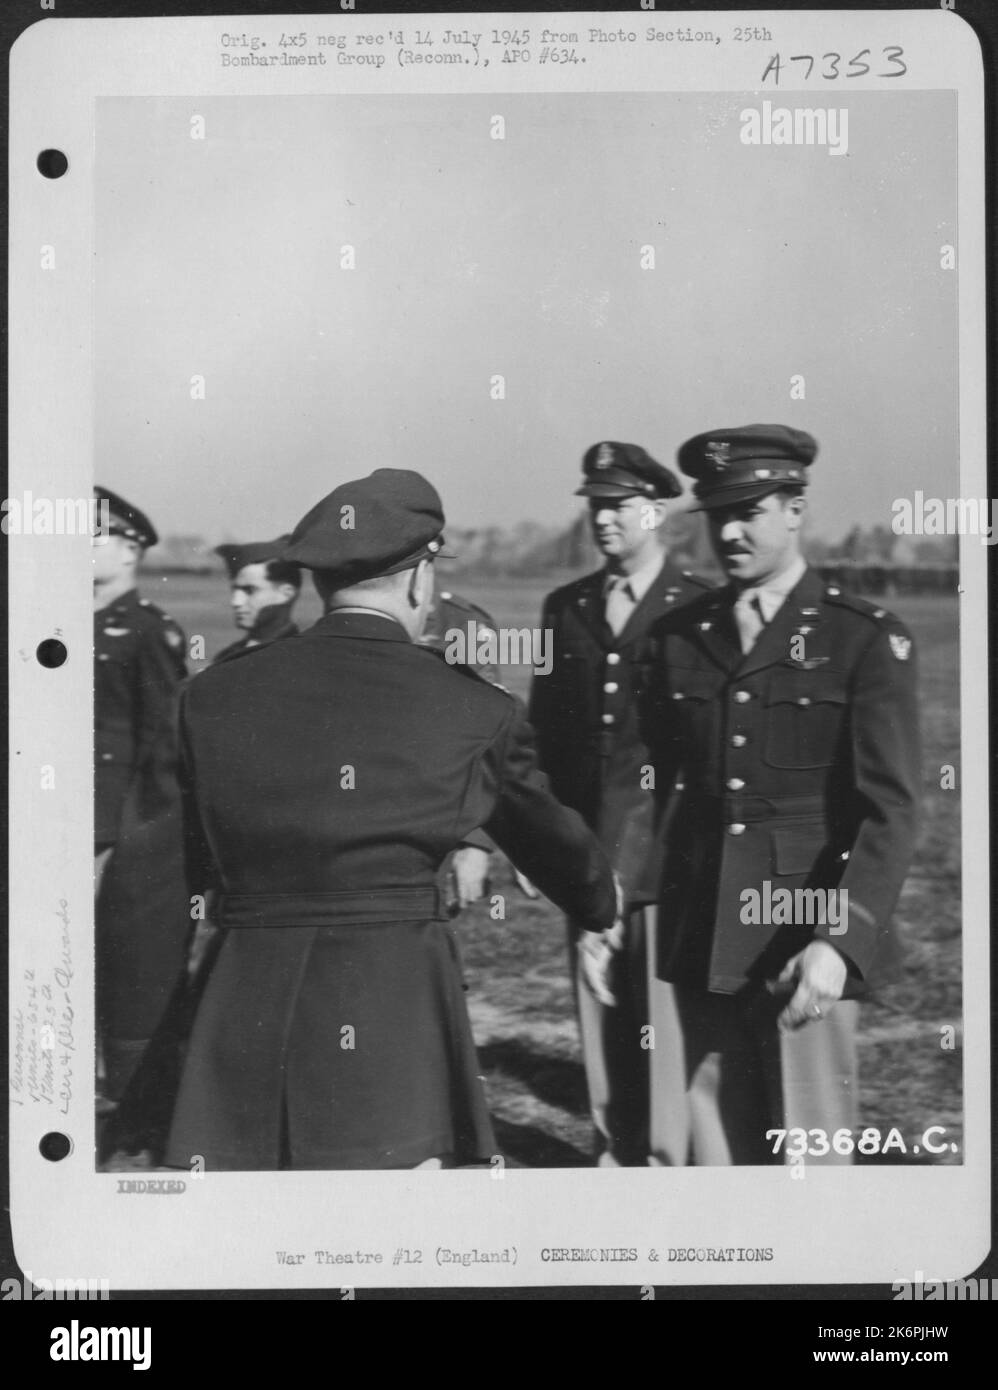 Lt. Hackman Of The 654Th Weather Reconnaissance Squadron, 25Th Weather Reconnaissance Group Is Congratulated After Receiving The Air Medal At An 8Th Air Force Base In England. 10 June 1944. Stock Photo